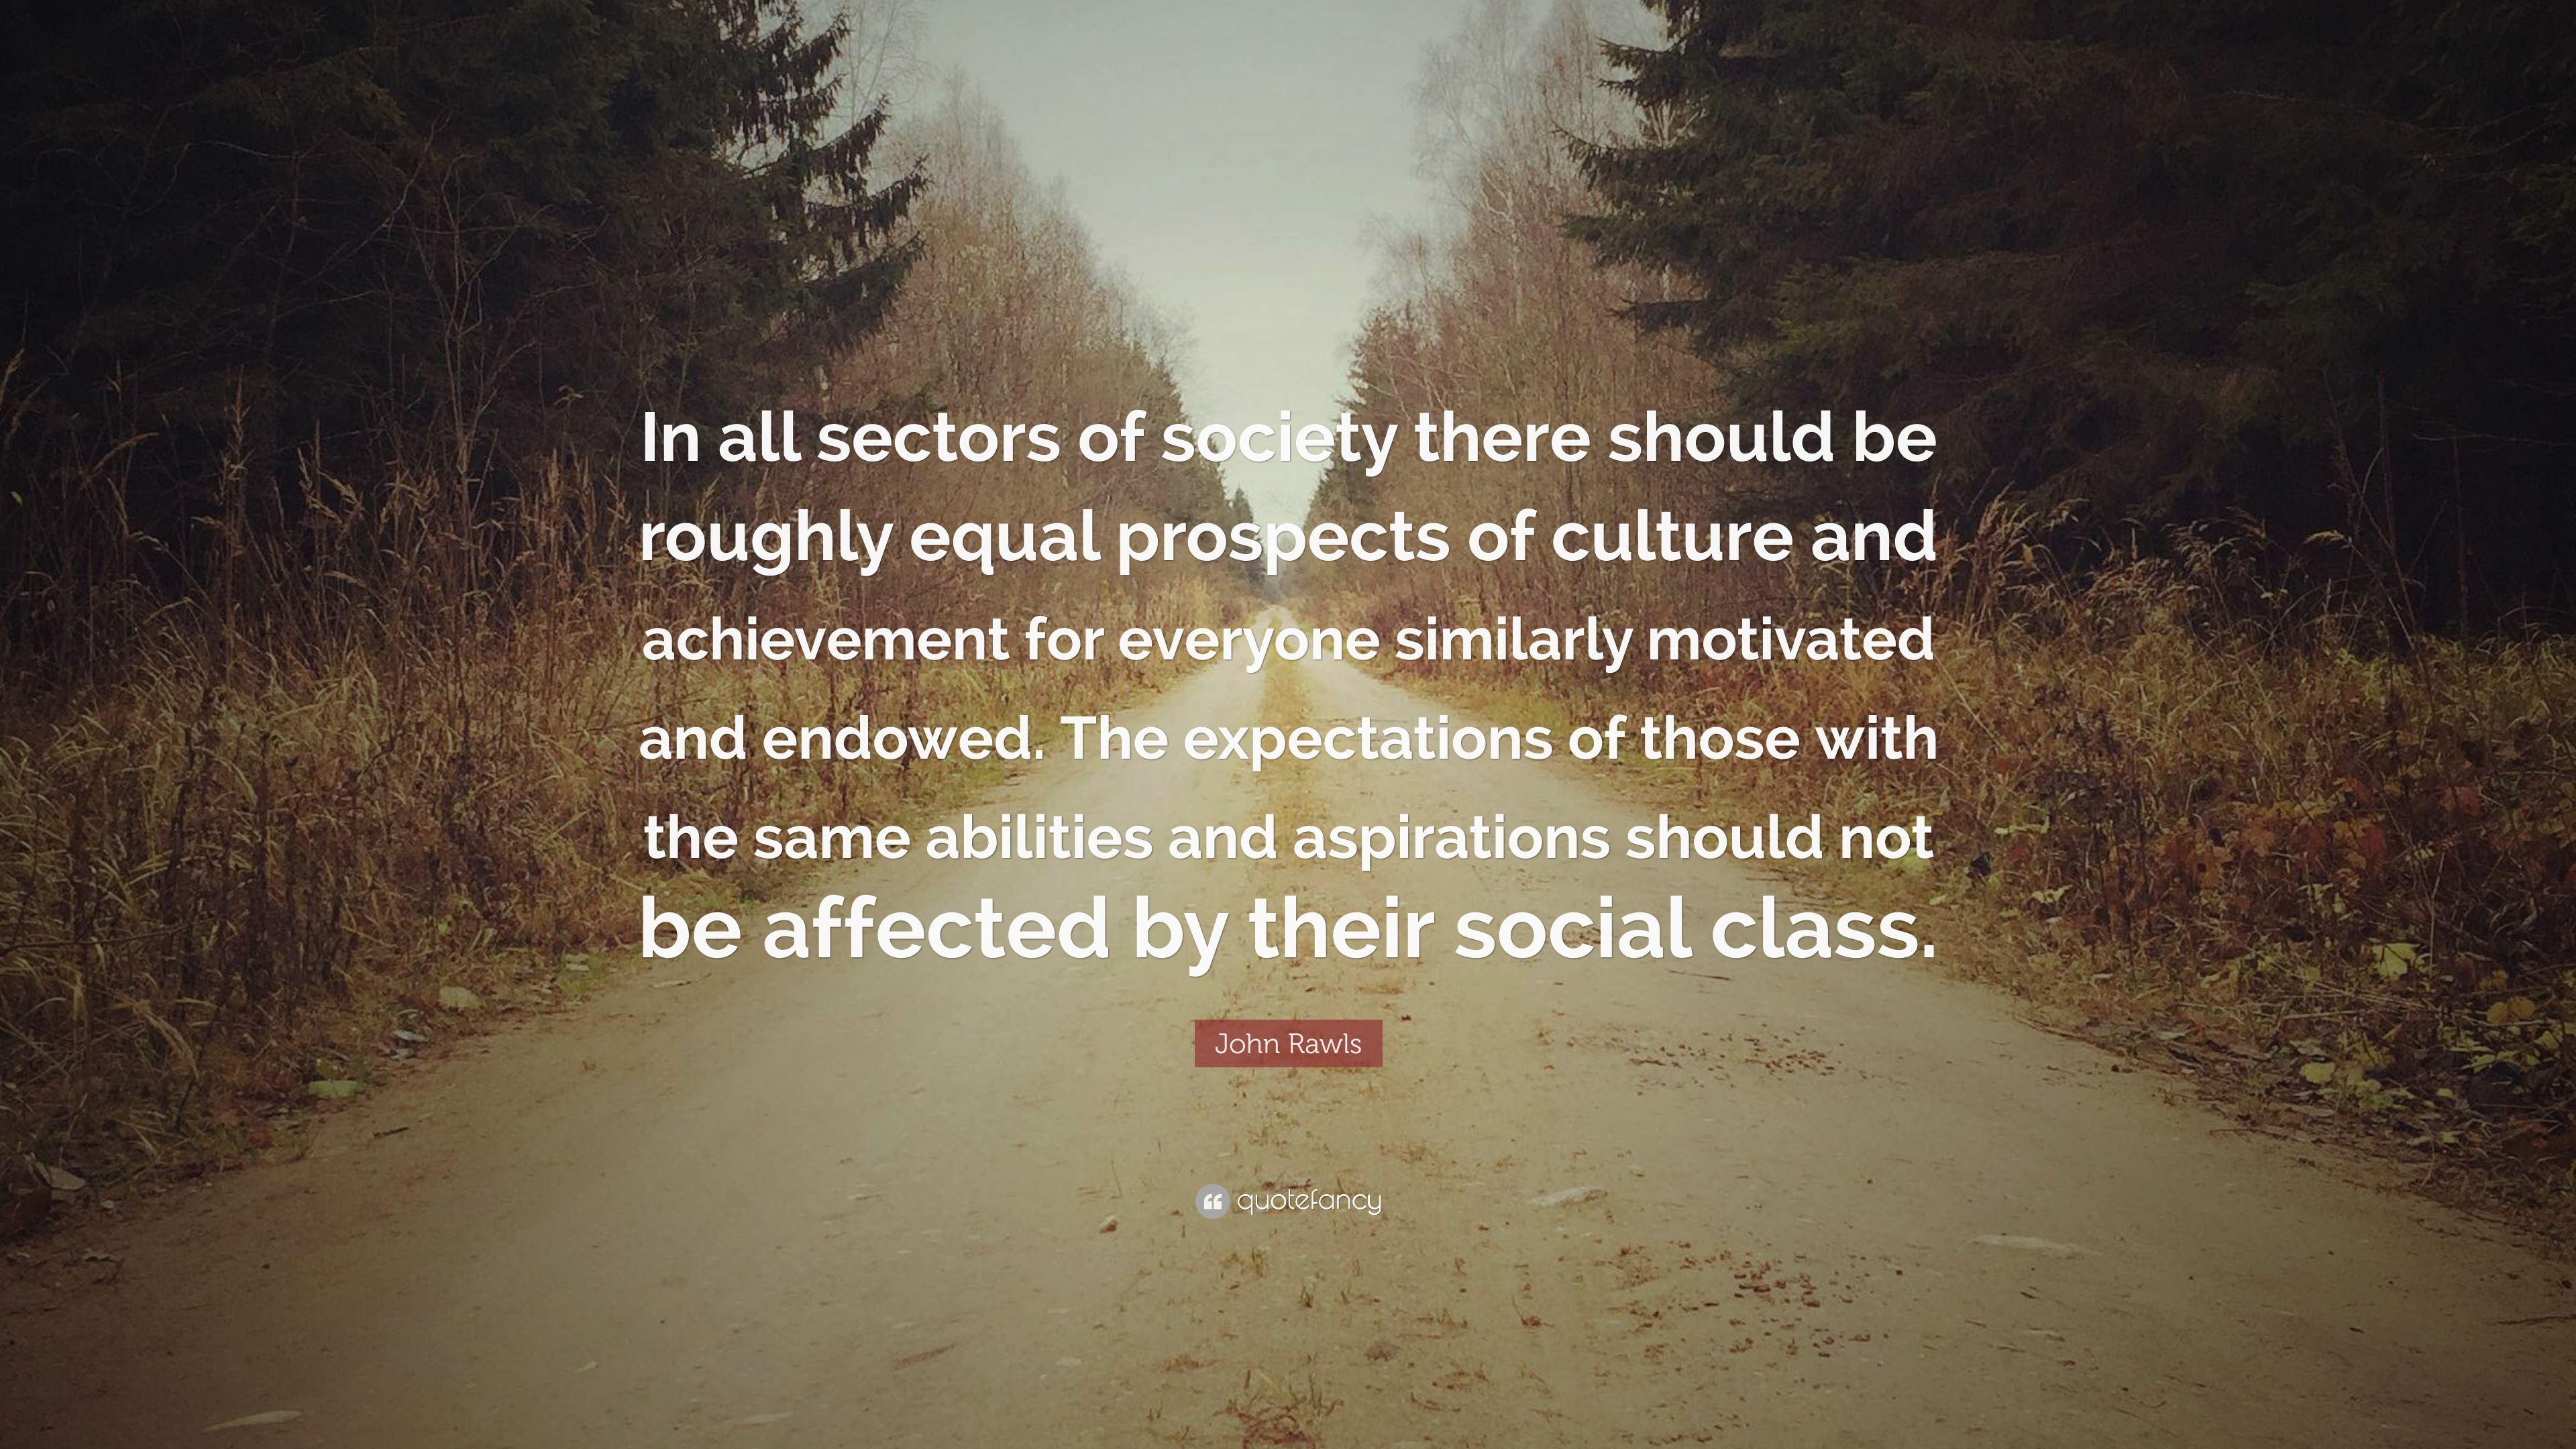 John Rawls Quote: “In all sectors of society there be roughly equal of culture and for everyone similarly moti...”